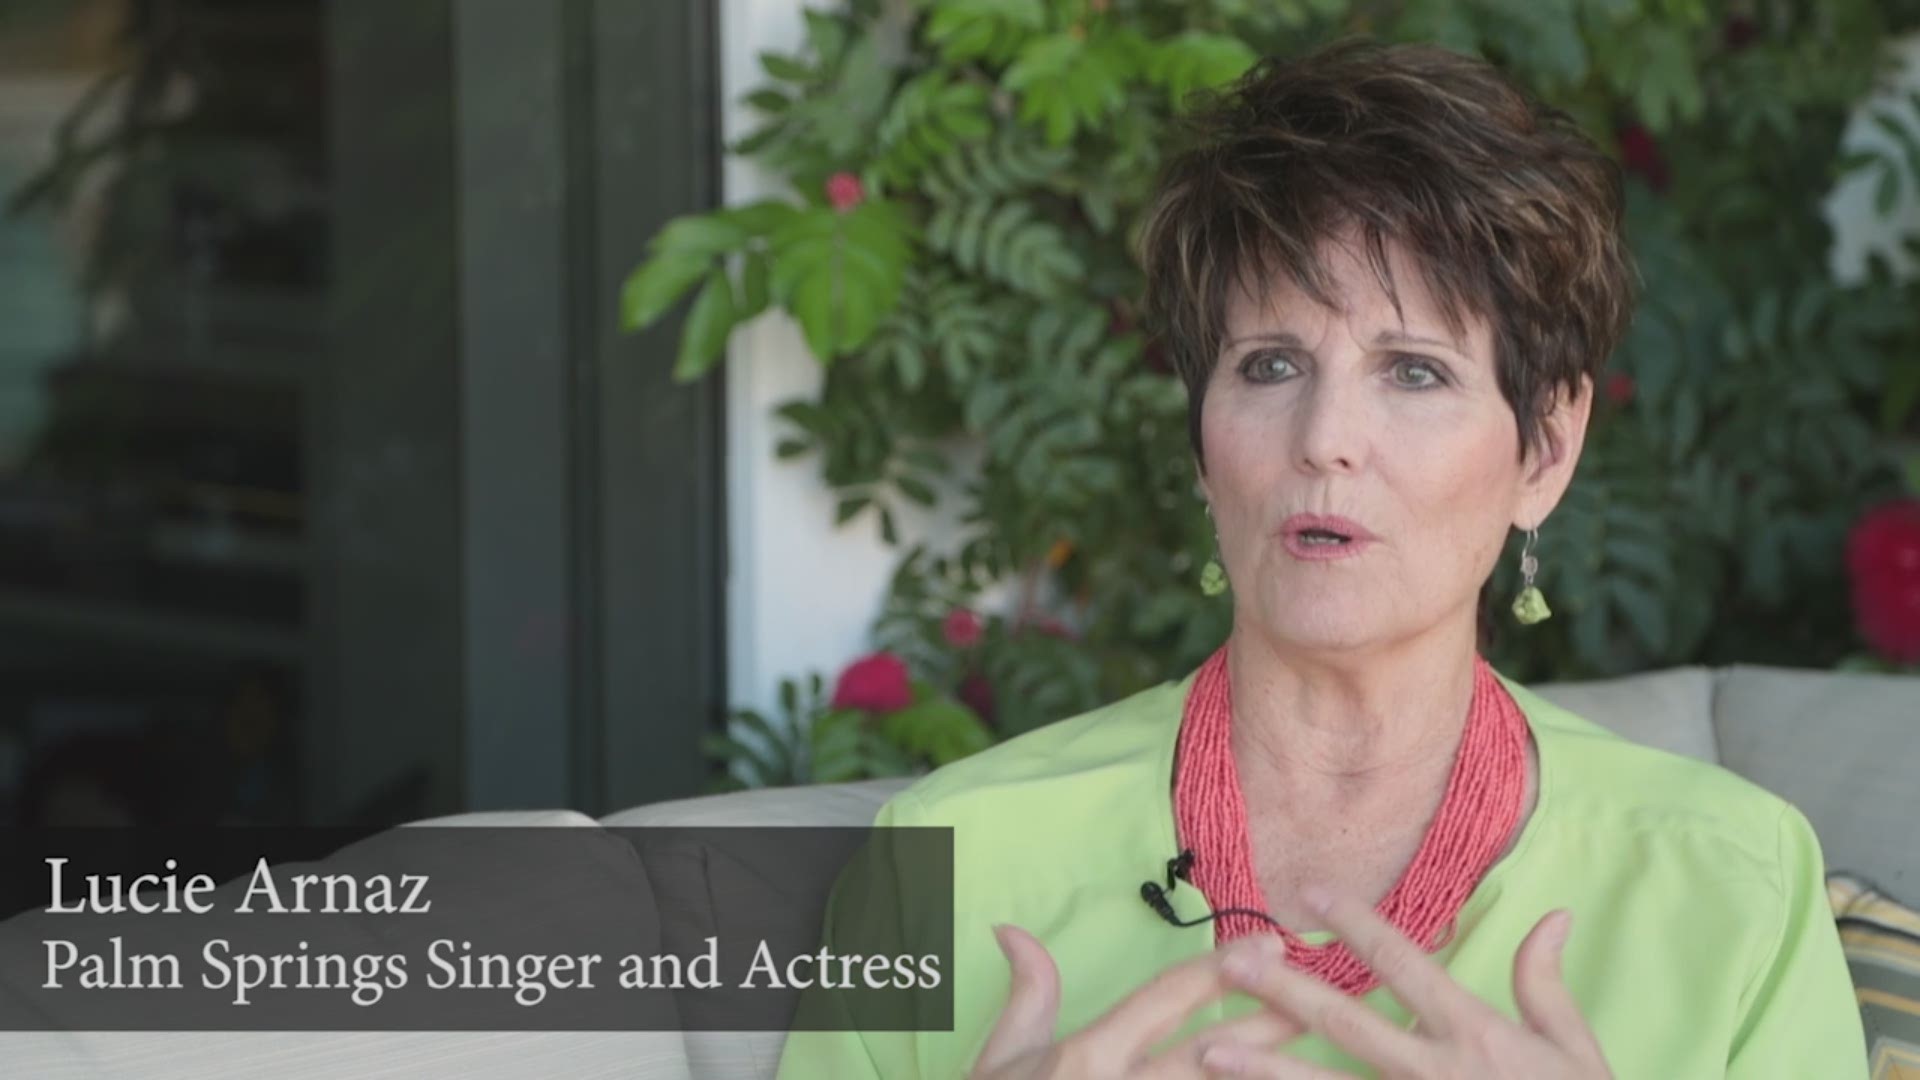 Lucie Arnaz talks about her recent tour, which embraces her father's music. Video courtesy The Desert Sun